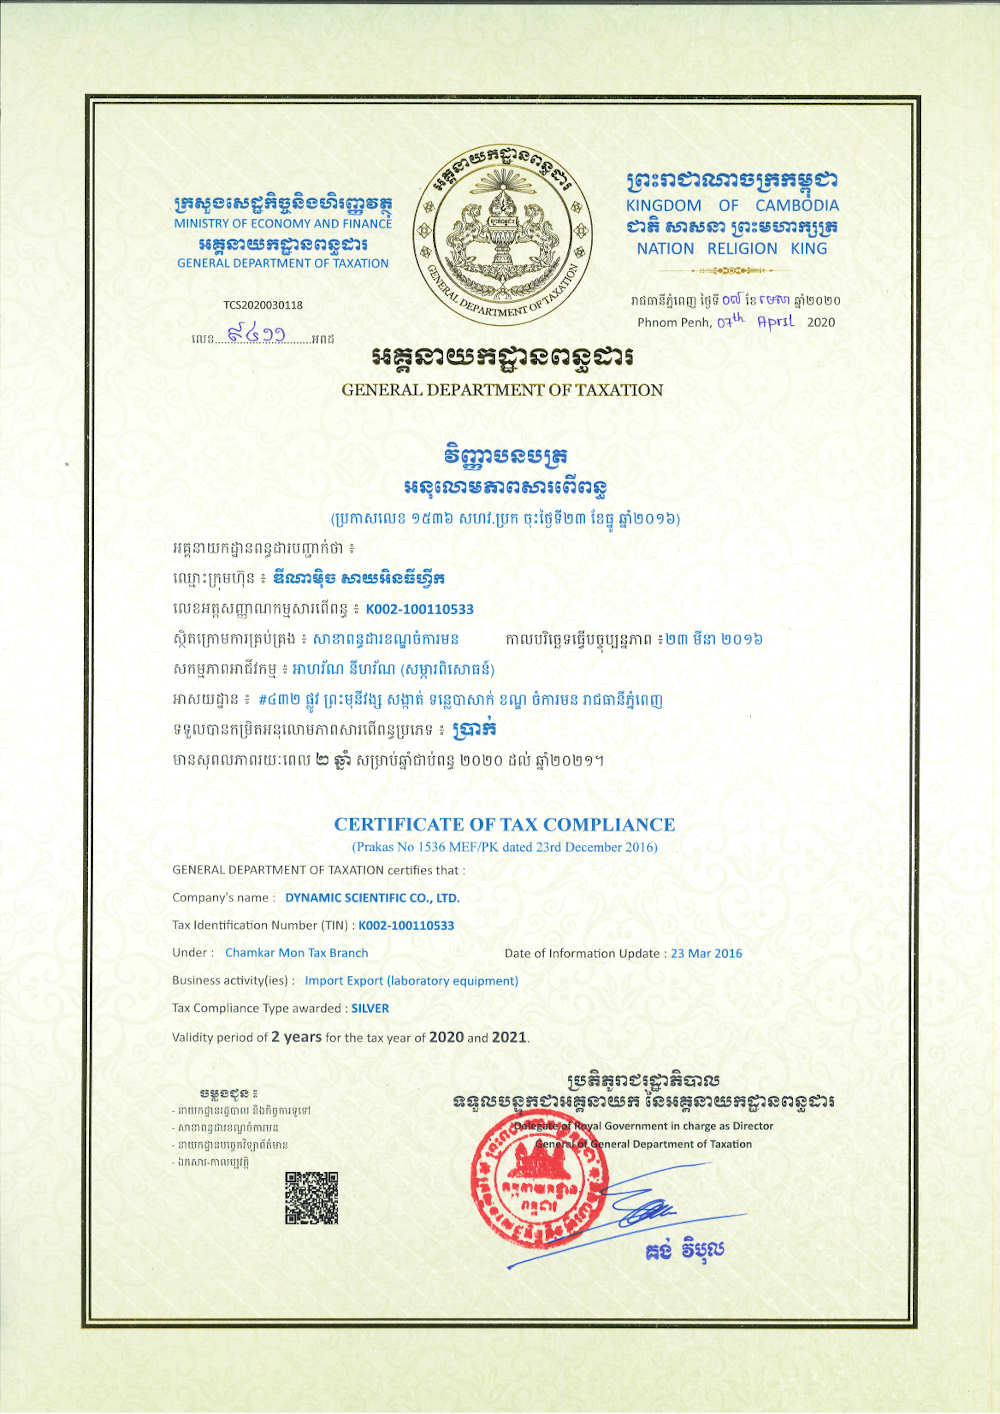 Dynamic Scientific Received Silver Certificate of Tax Compliance